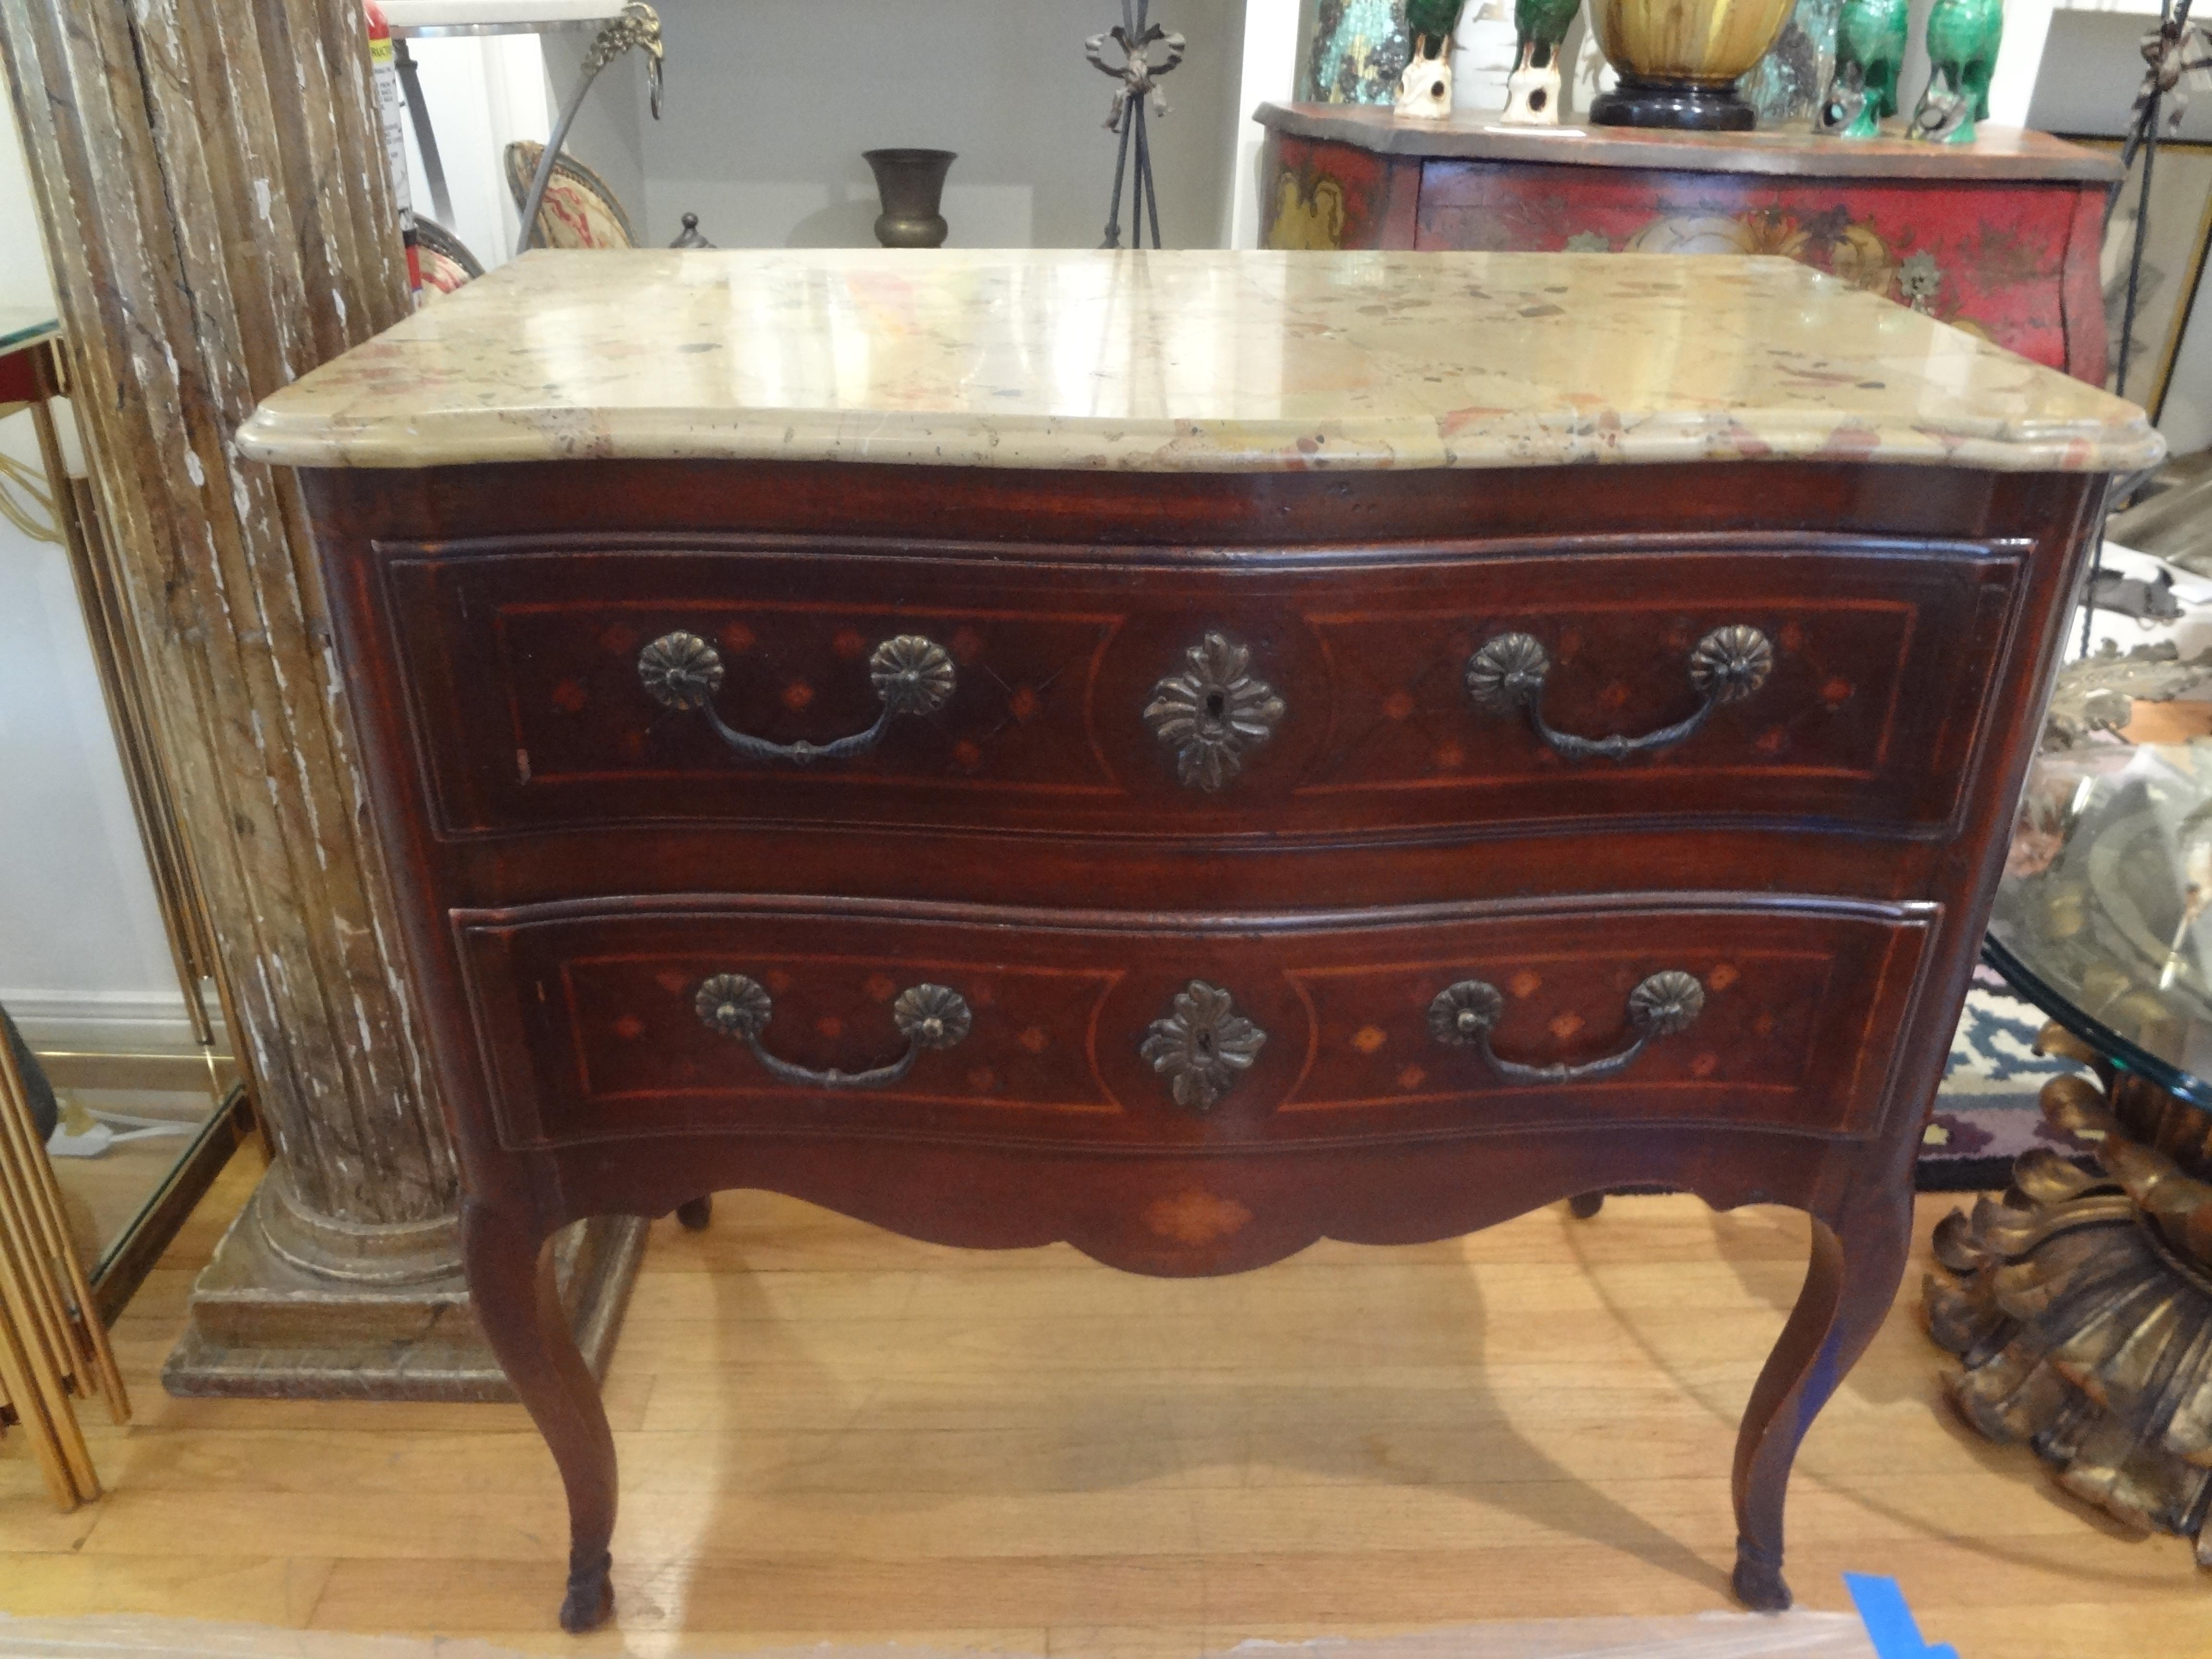 19th century French Louis XV style commode.
Stunning 19th century French Louis XV style 2 drawer commode with hoof feet, bronze hardware and a Breche d’Alp marble top. This French commode or chest is the perfect size for an entrance hall, living